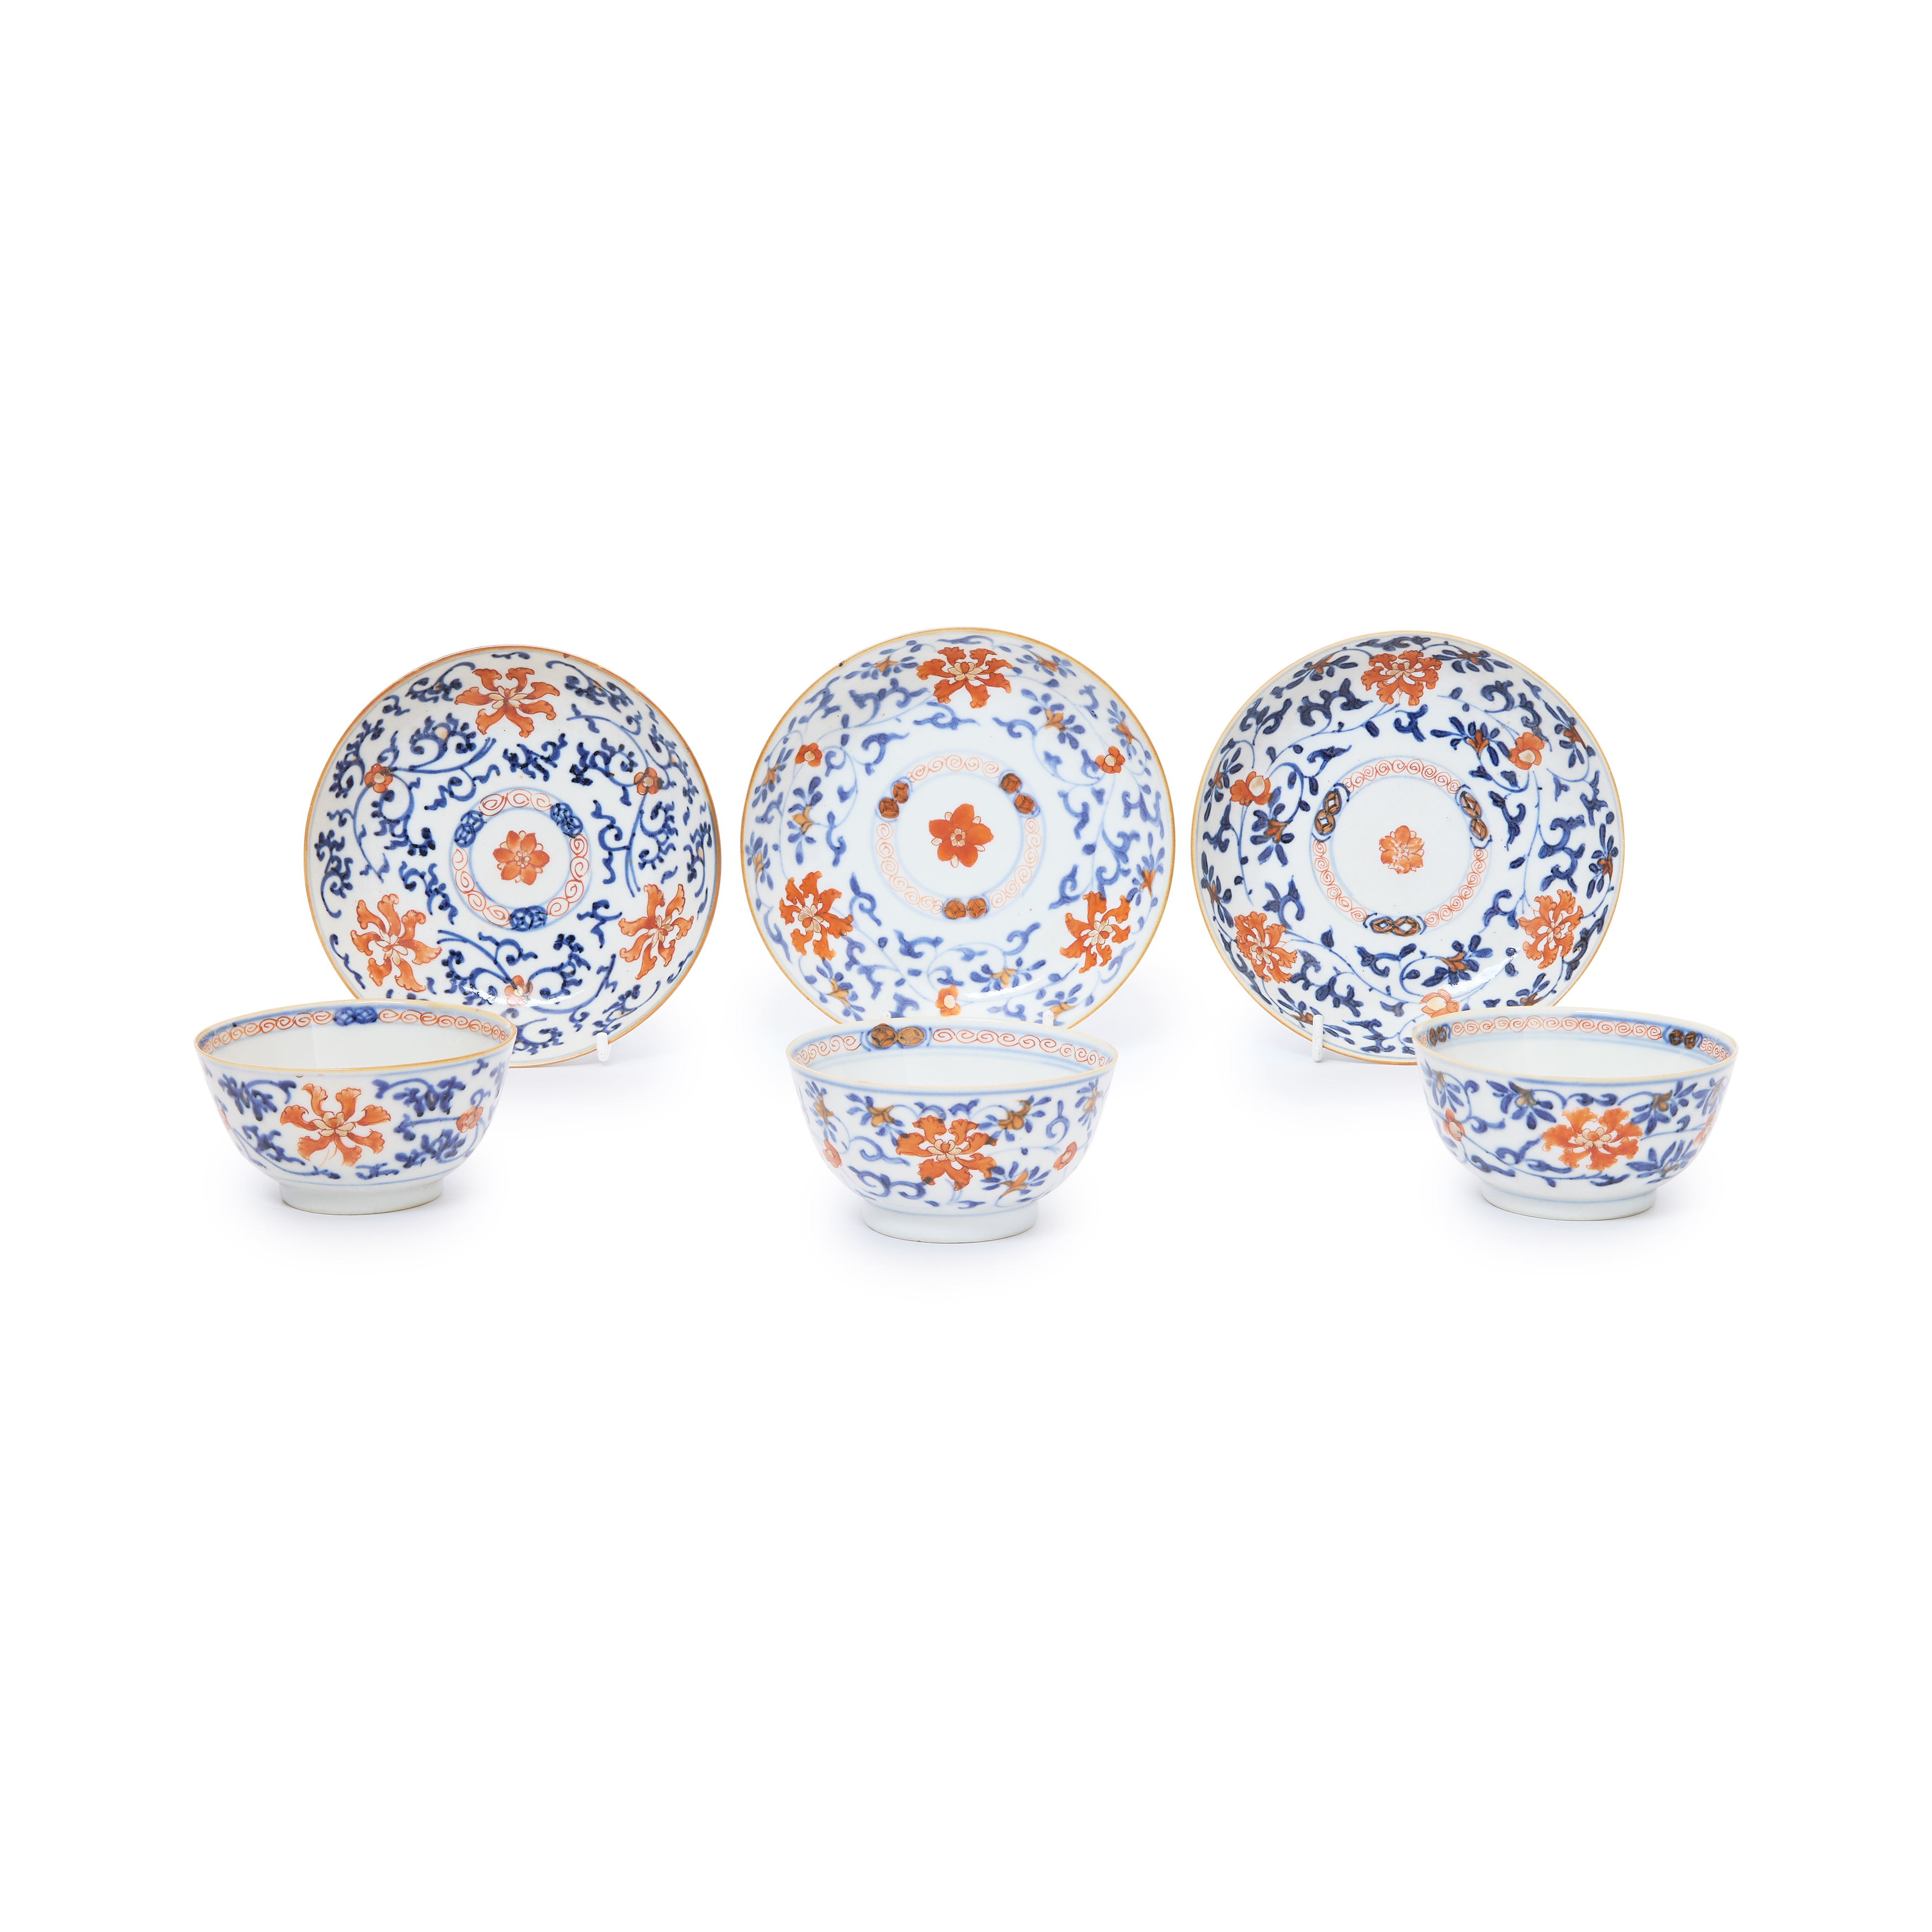 Three sets of Chinese iron red and blue and white tea bowls and saucers Qing dynasty, 19th centu...